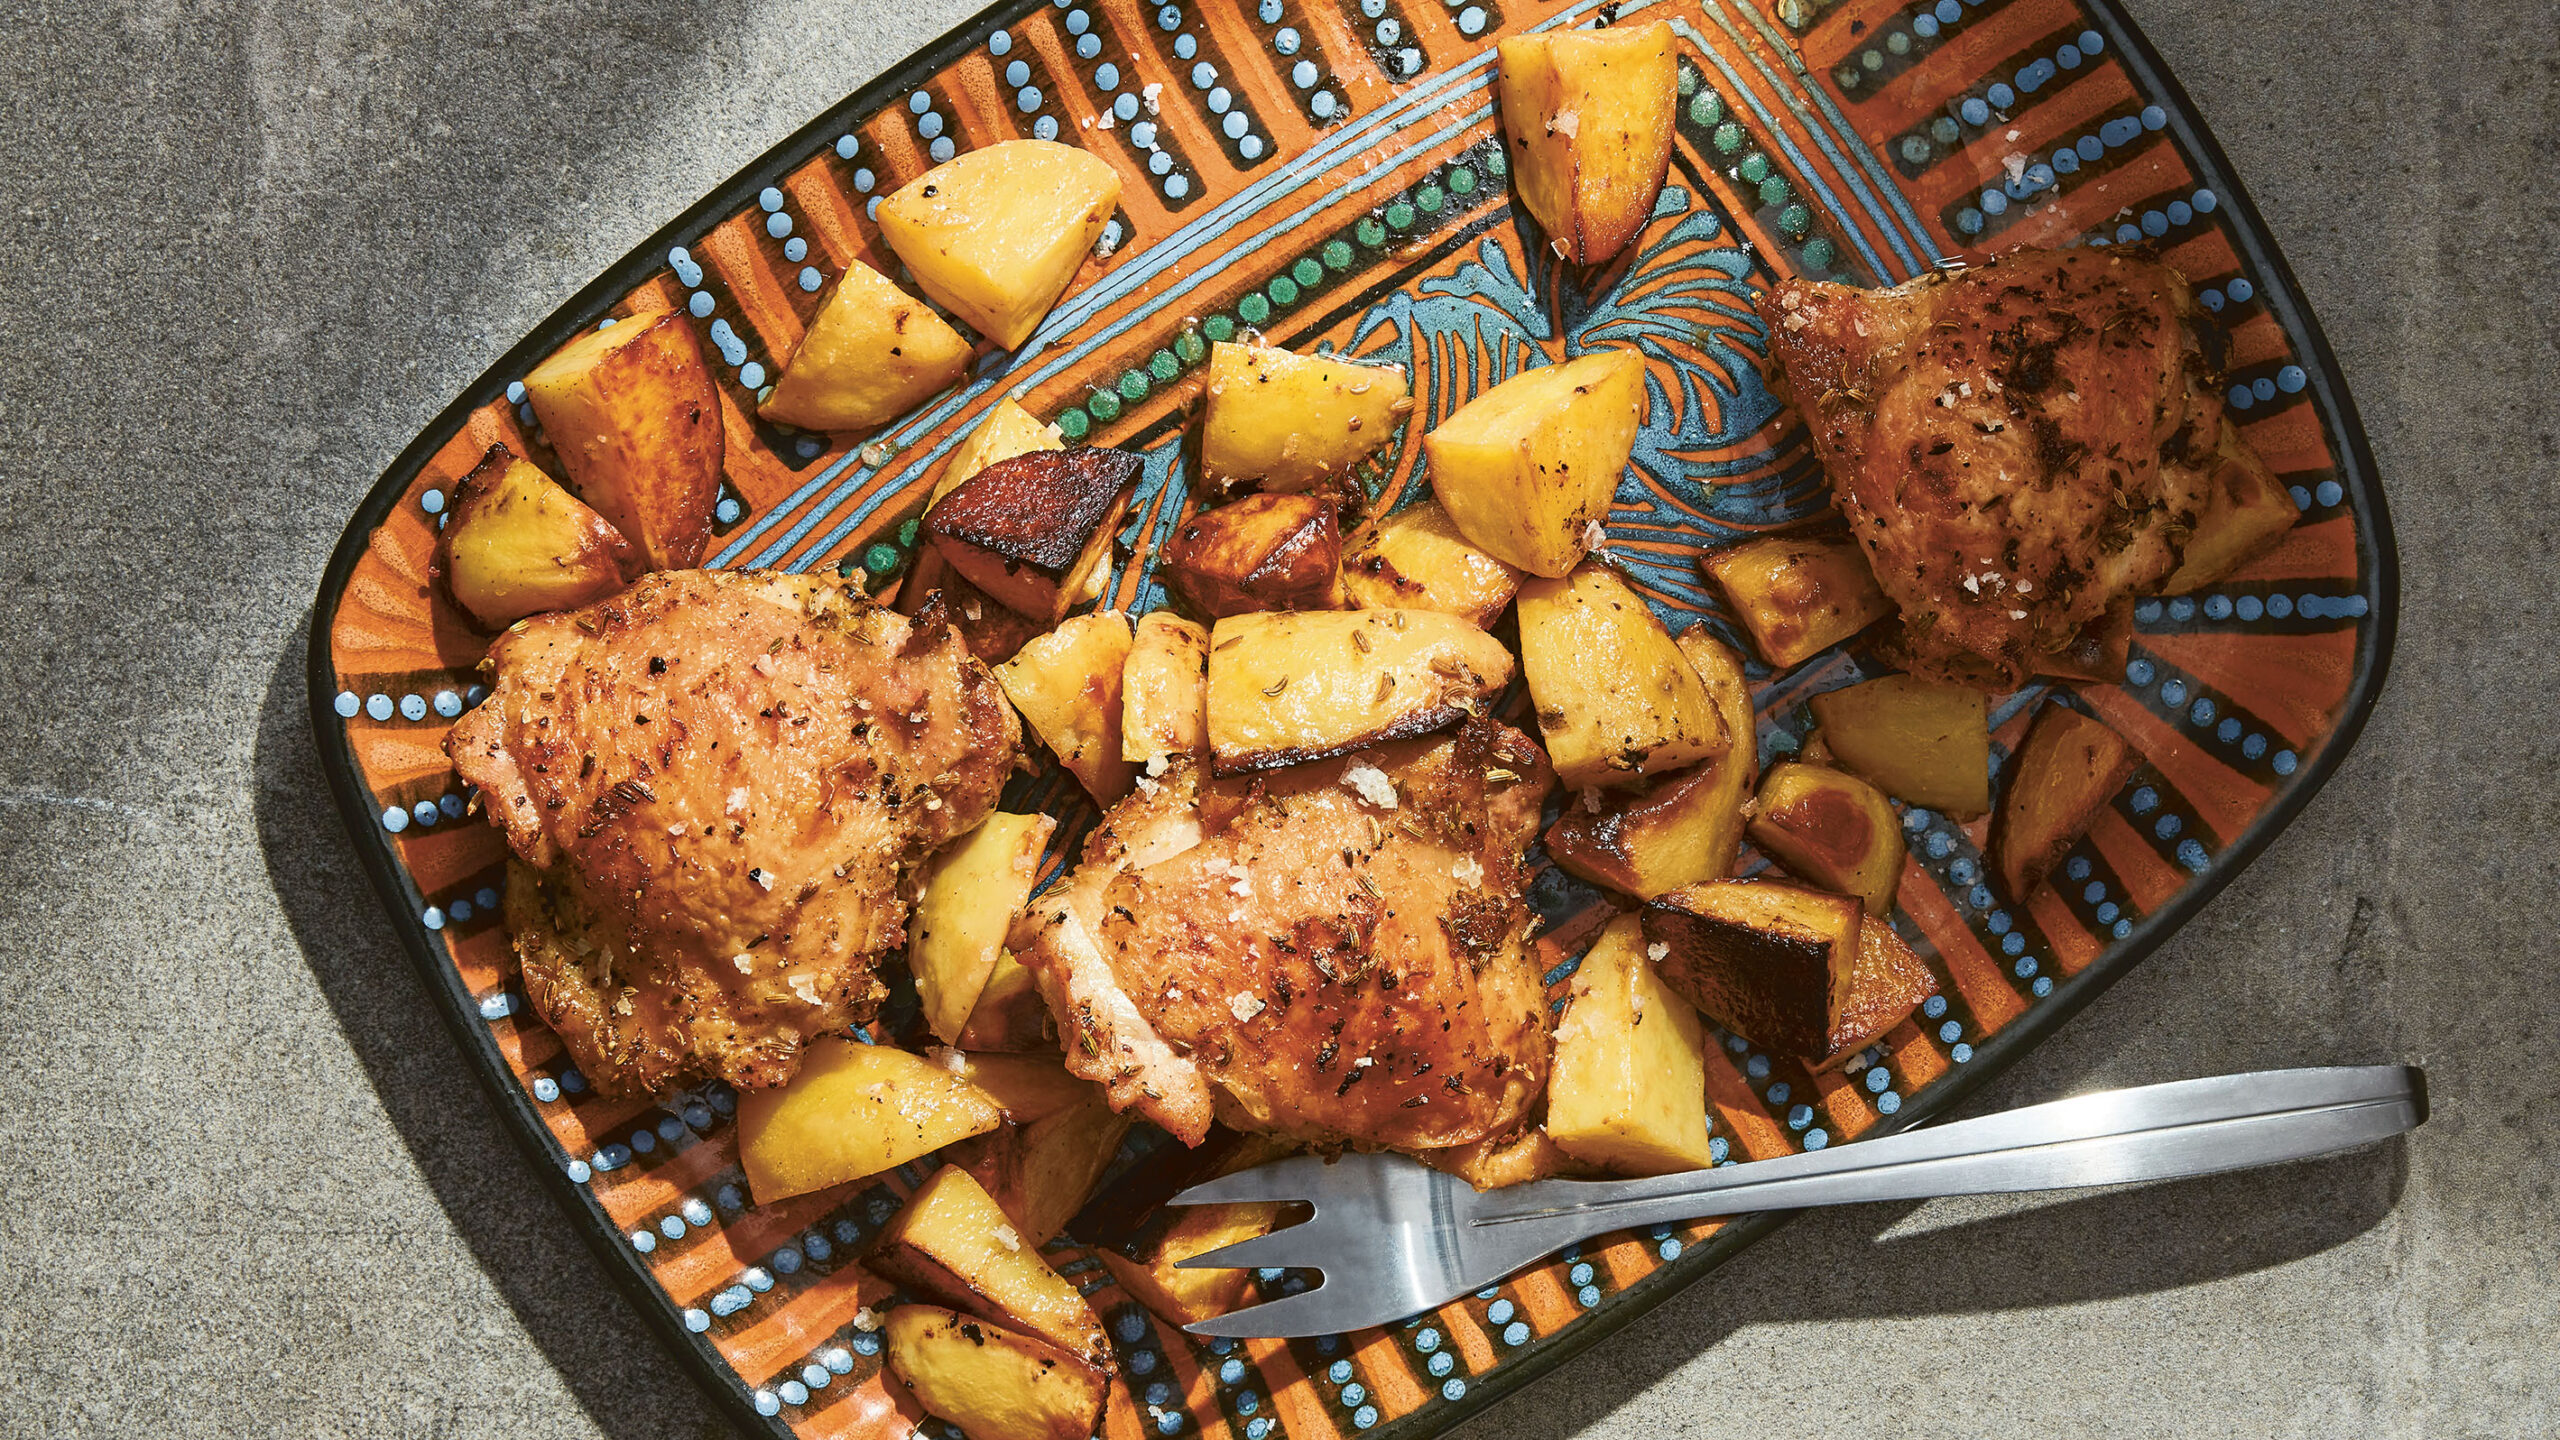 Lemon Pepper Chicken and Potatoes recipe_Reprinted from I Dream of Dinner. Copyright © 2022 by Alexandra Slagle. Photographs copyright © 2022 by Mark Weinberg. Published by Clarkson Potter, an imprint of Random House.